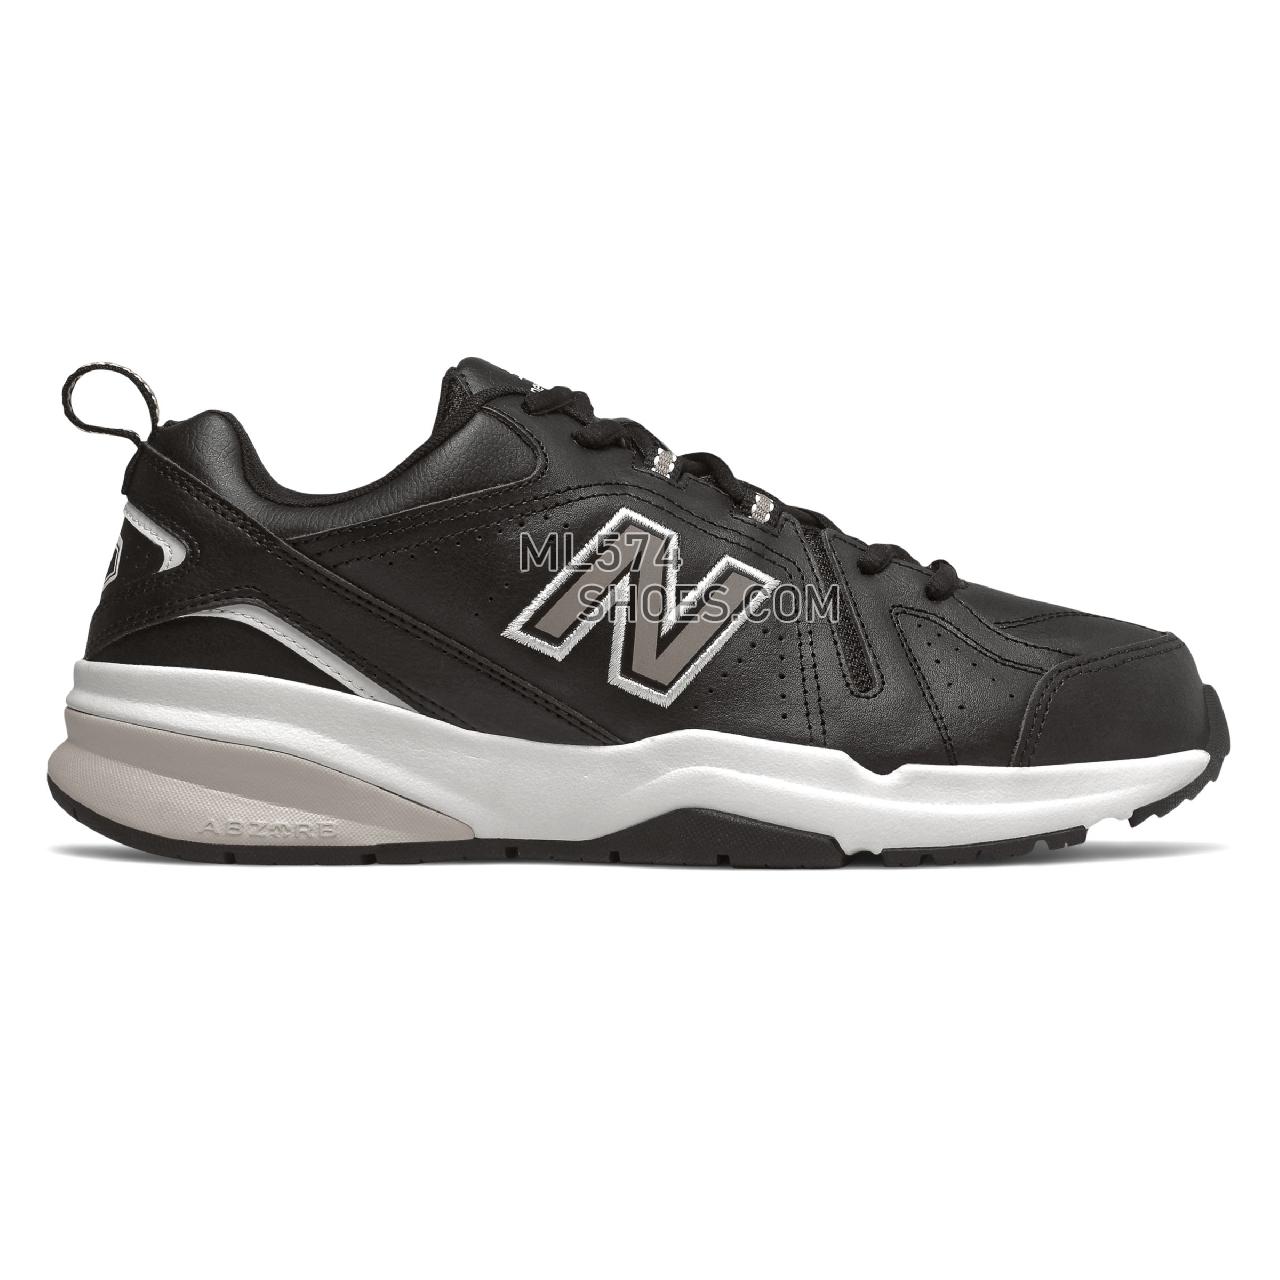 New Balance 608v5 - Men's Everyday Trainers - Black with White - MX608RB5